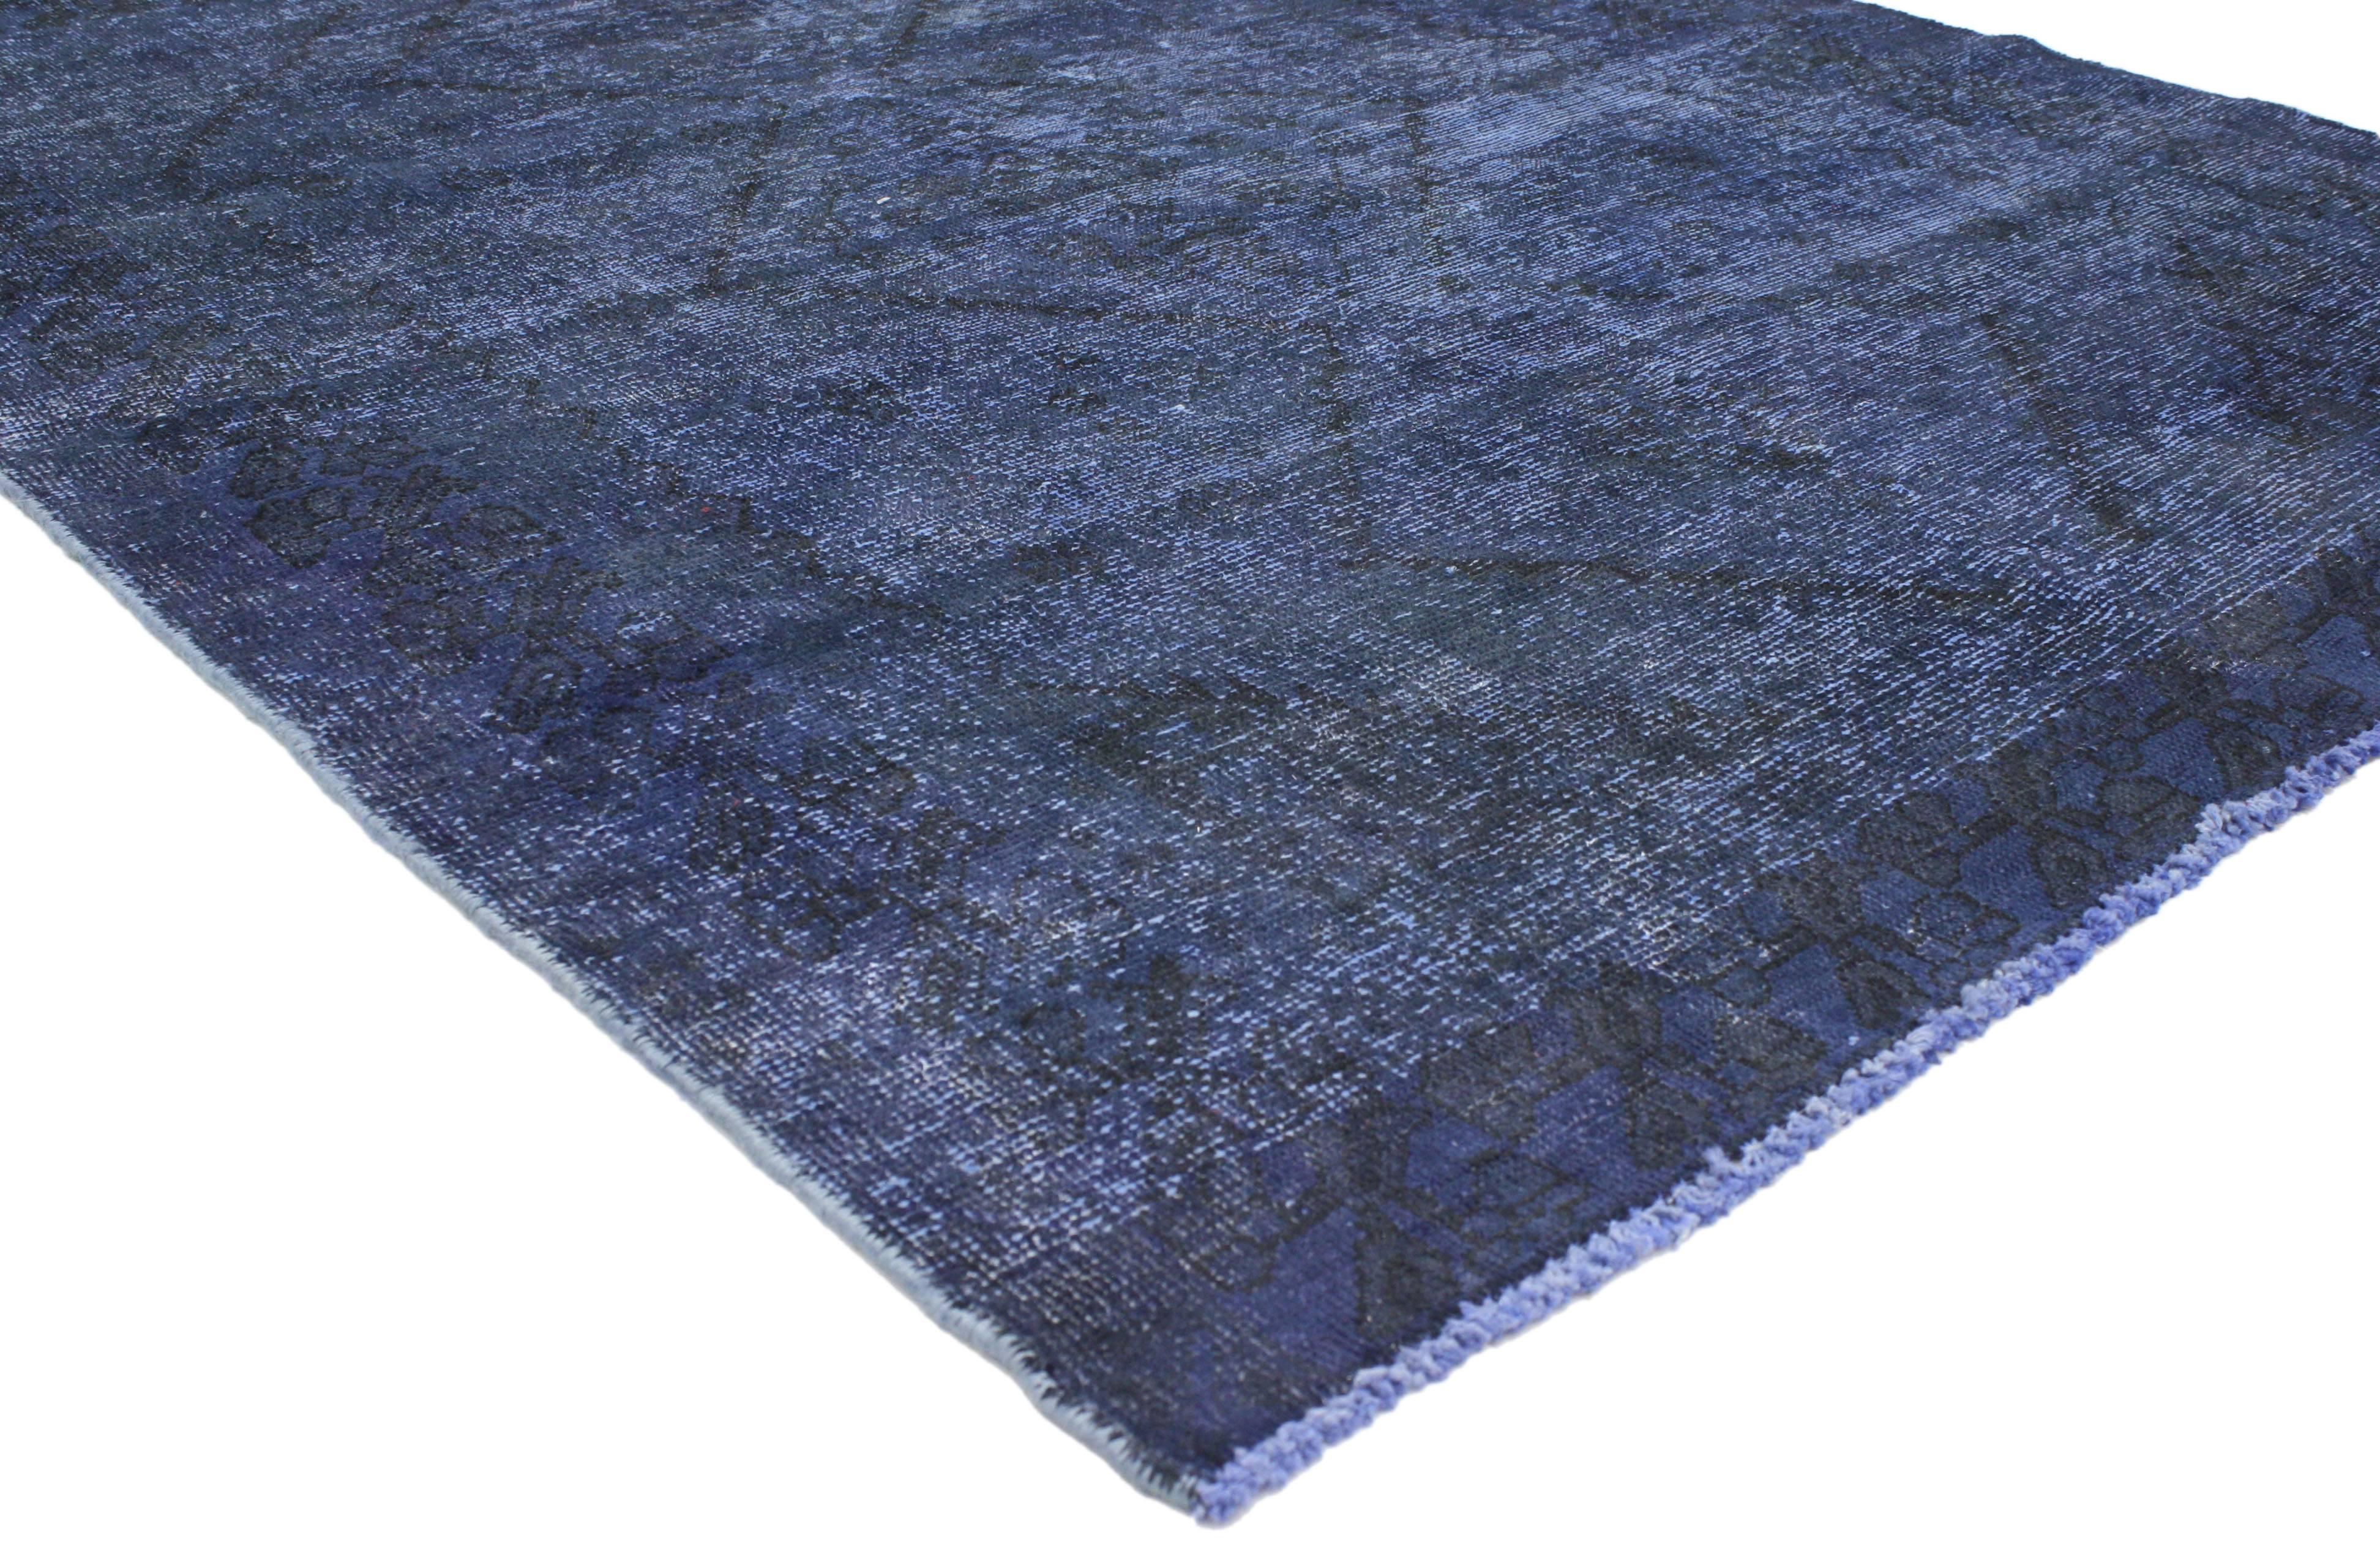 80418 Distressed Vintage Blue Persian Overdyed Rug with Luxe Mediterranean Style. Luxe Mediterranean style meets elegant simplicity in this hand-knotted wool distressed vintage overdyed blue Persian rug. The field is covered in an all-over botanical